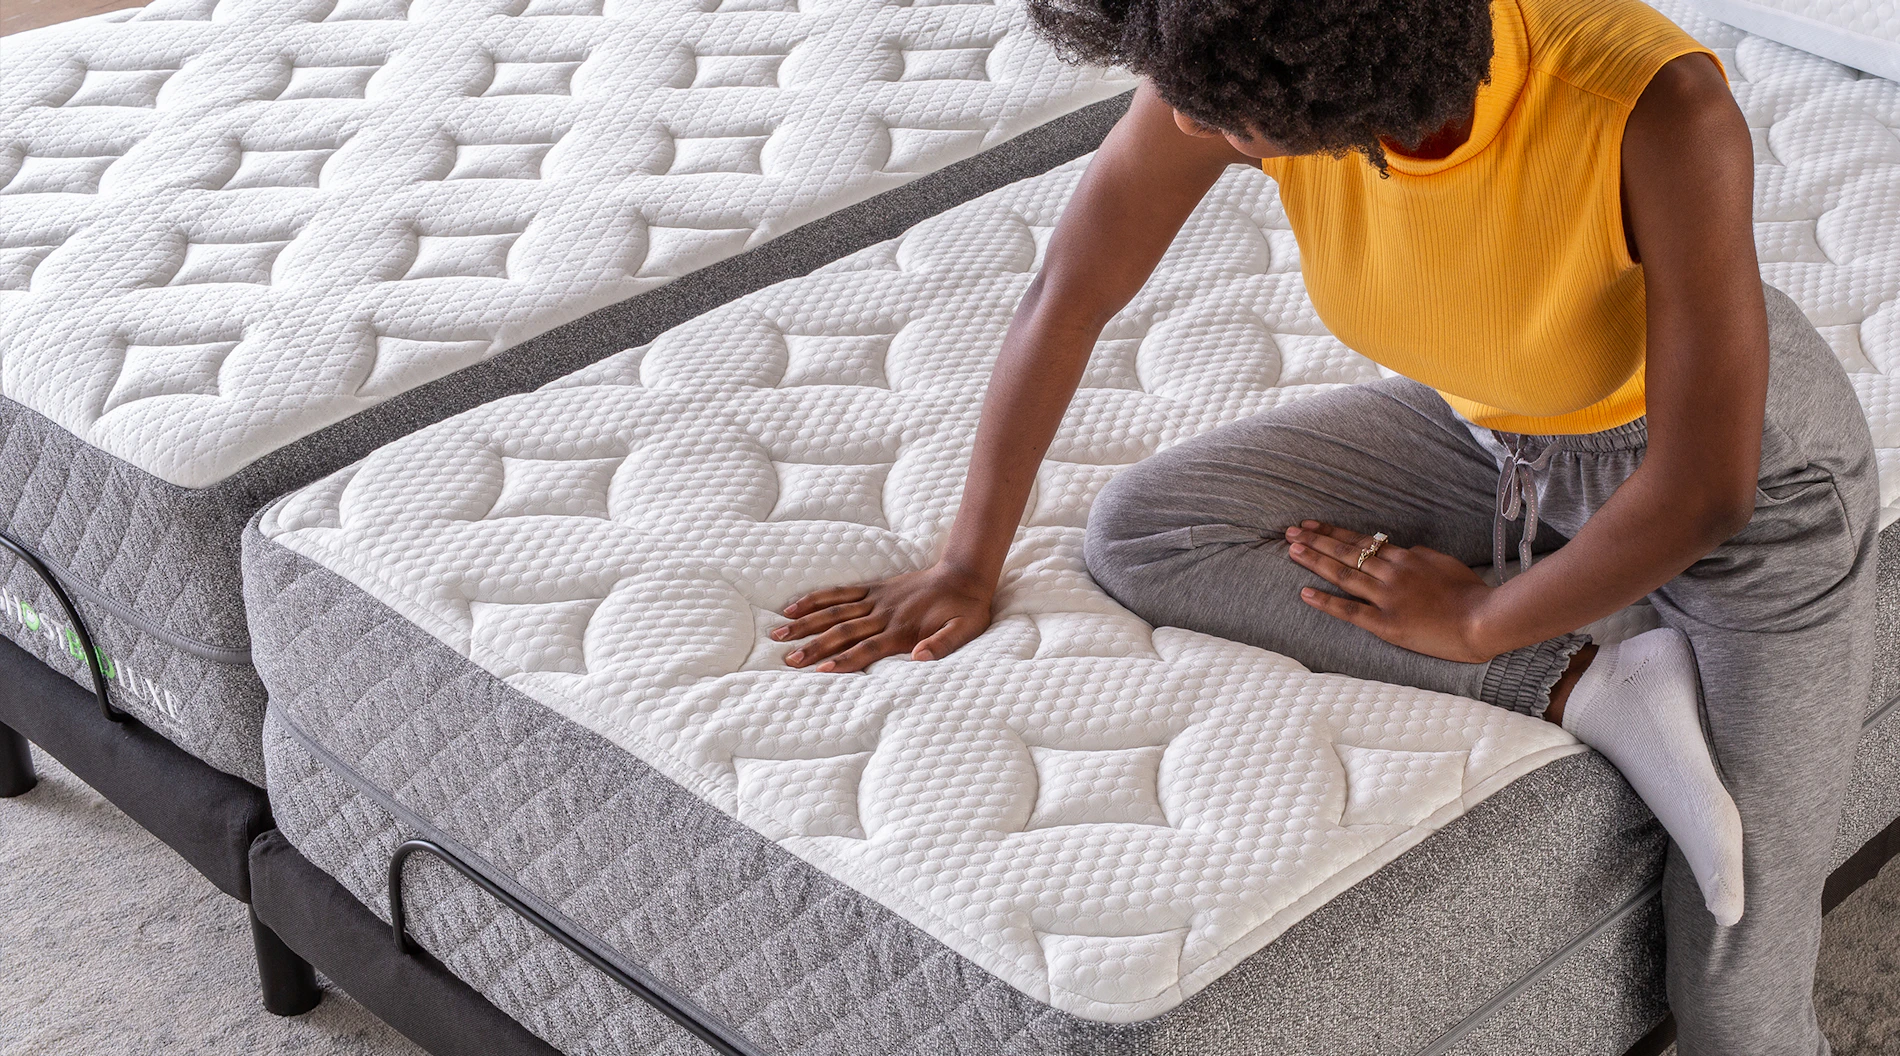 GhostBed mattresses are made with a high-quality, dense foam foundation.